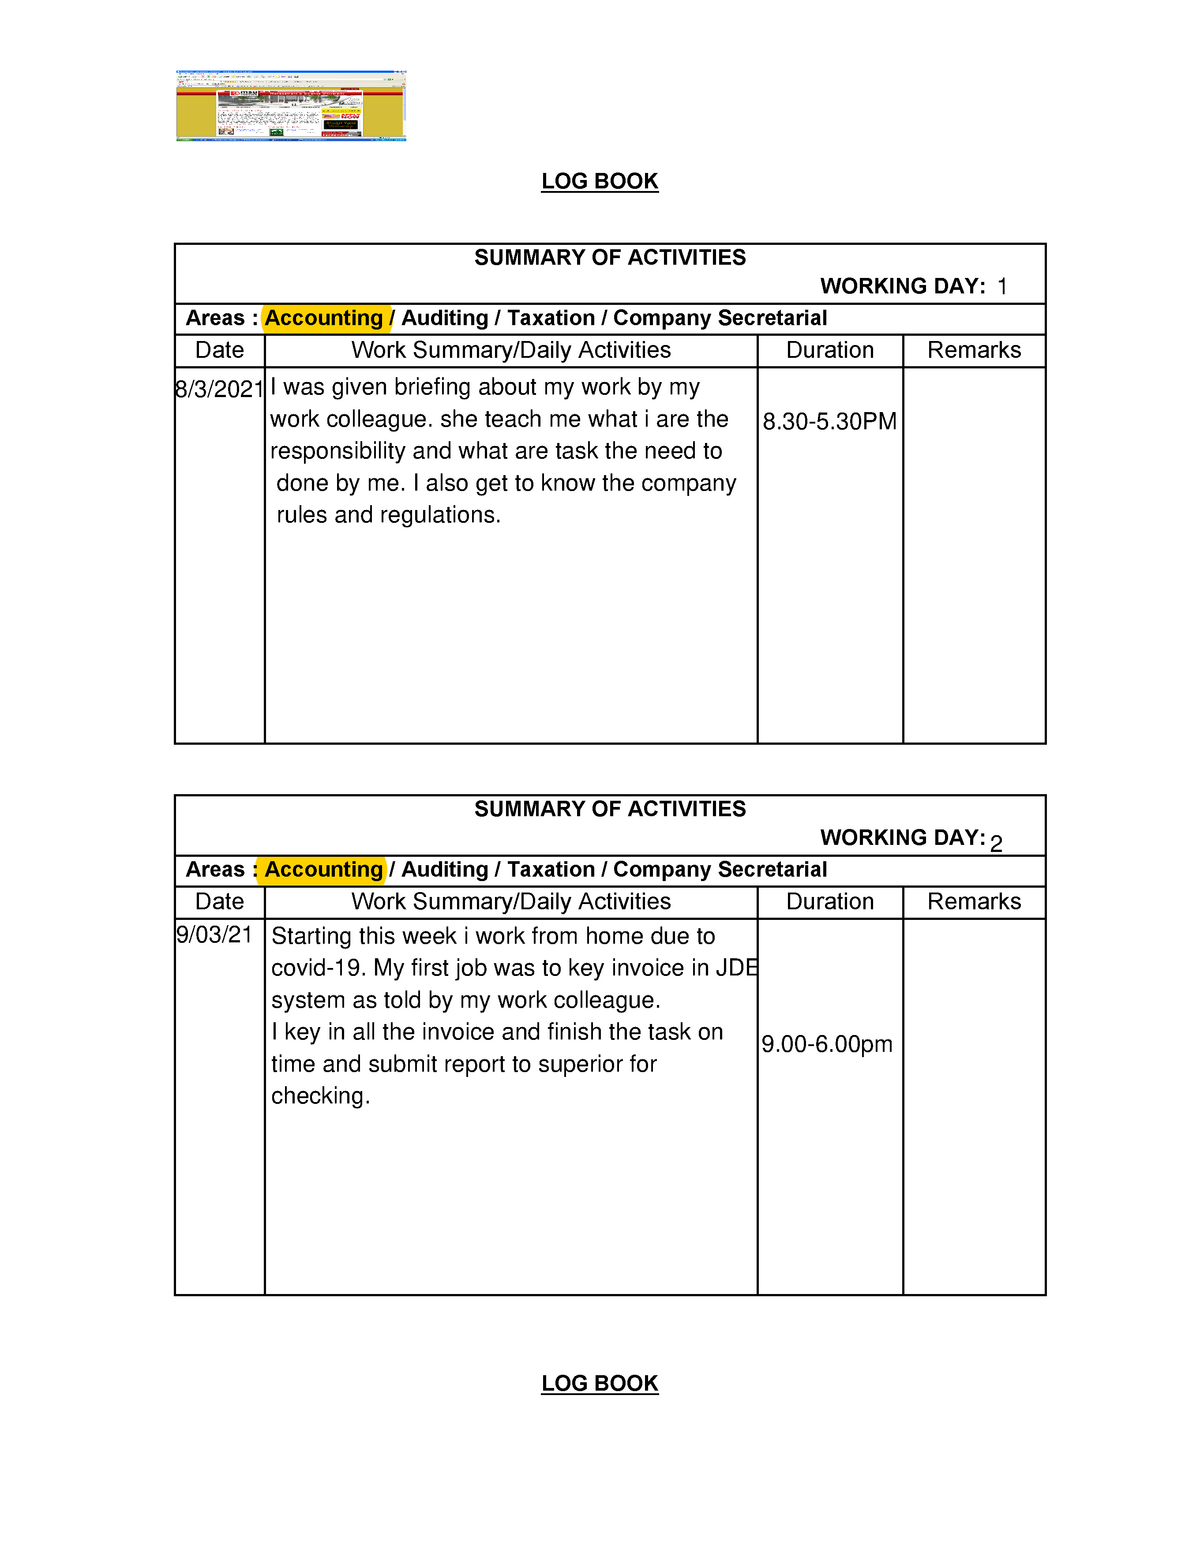 Log book - 1 - practical - LOG BOOK SUMMARY OF ACTIVITIES WORKING DAY